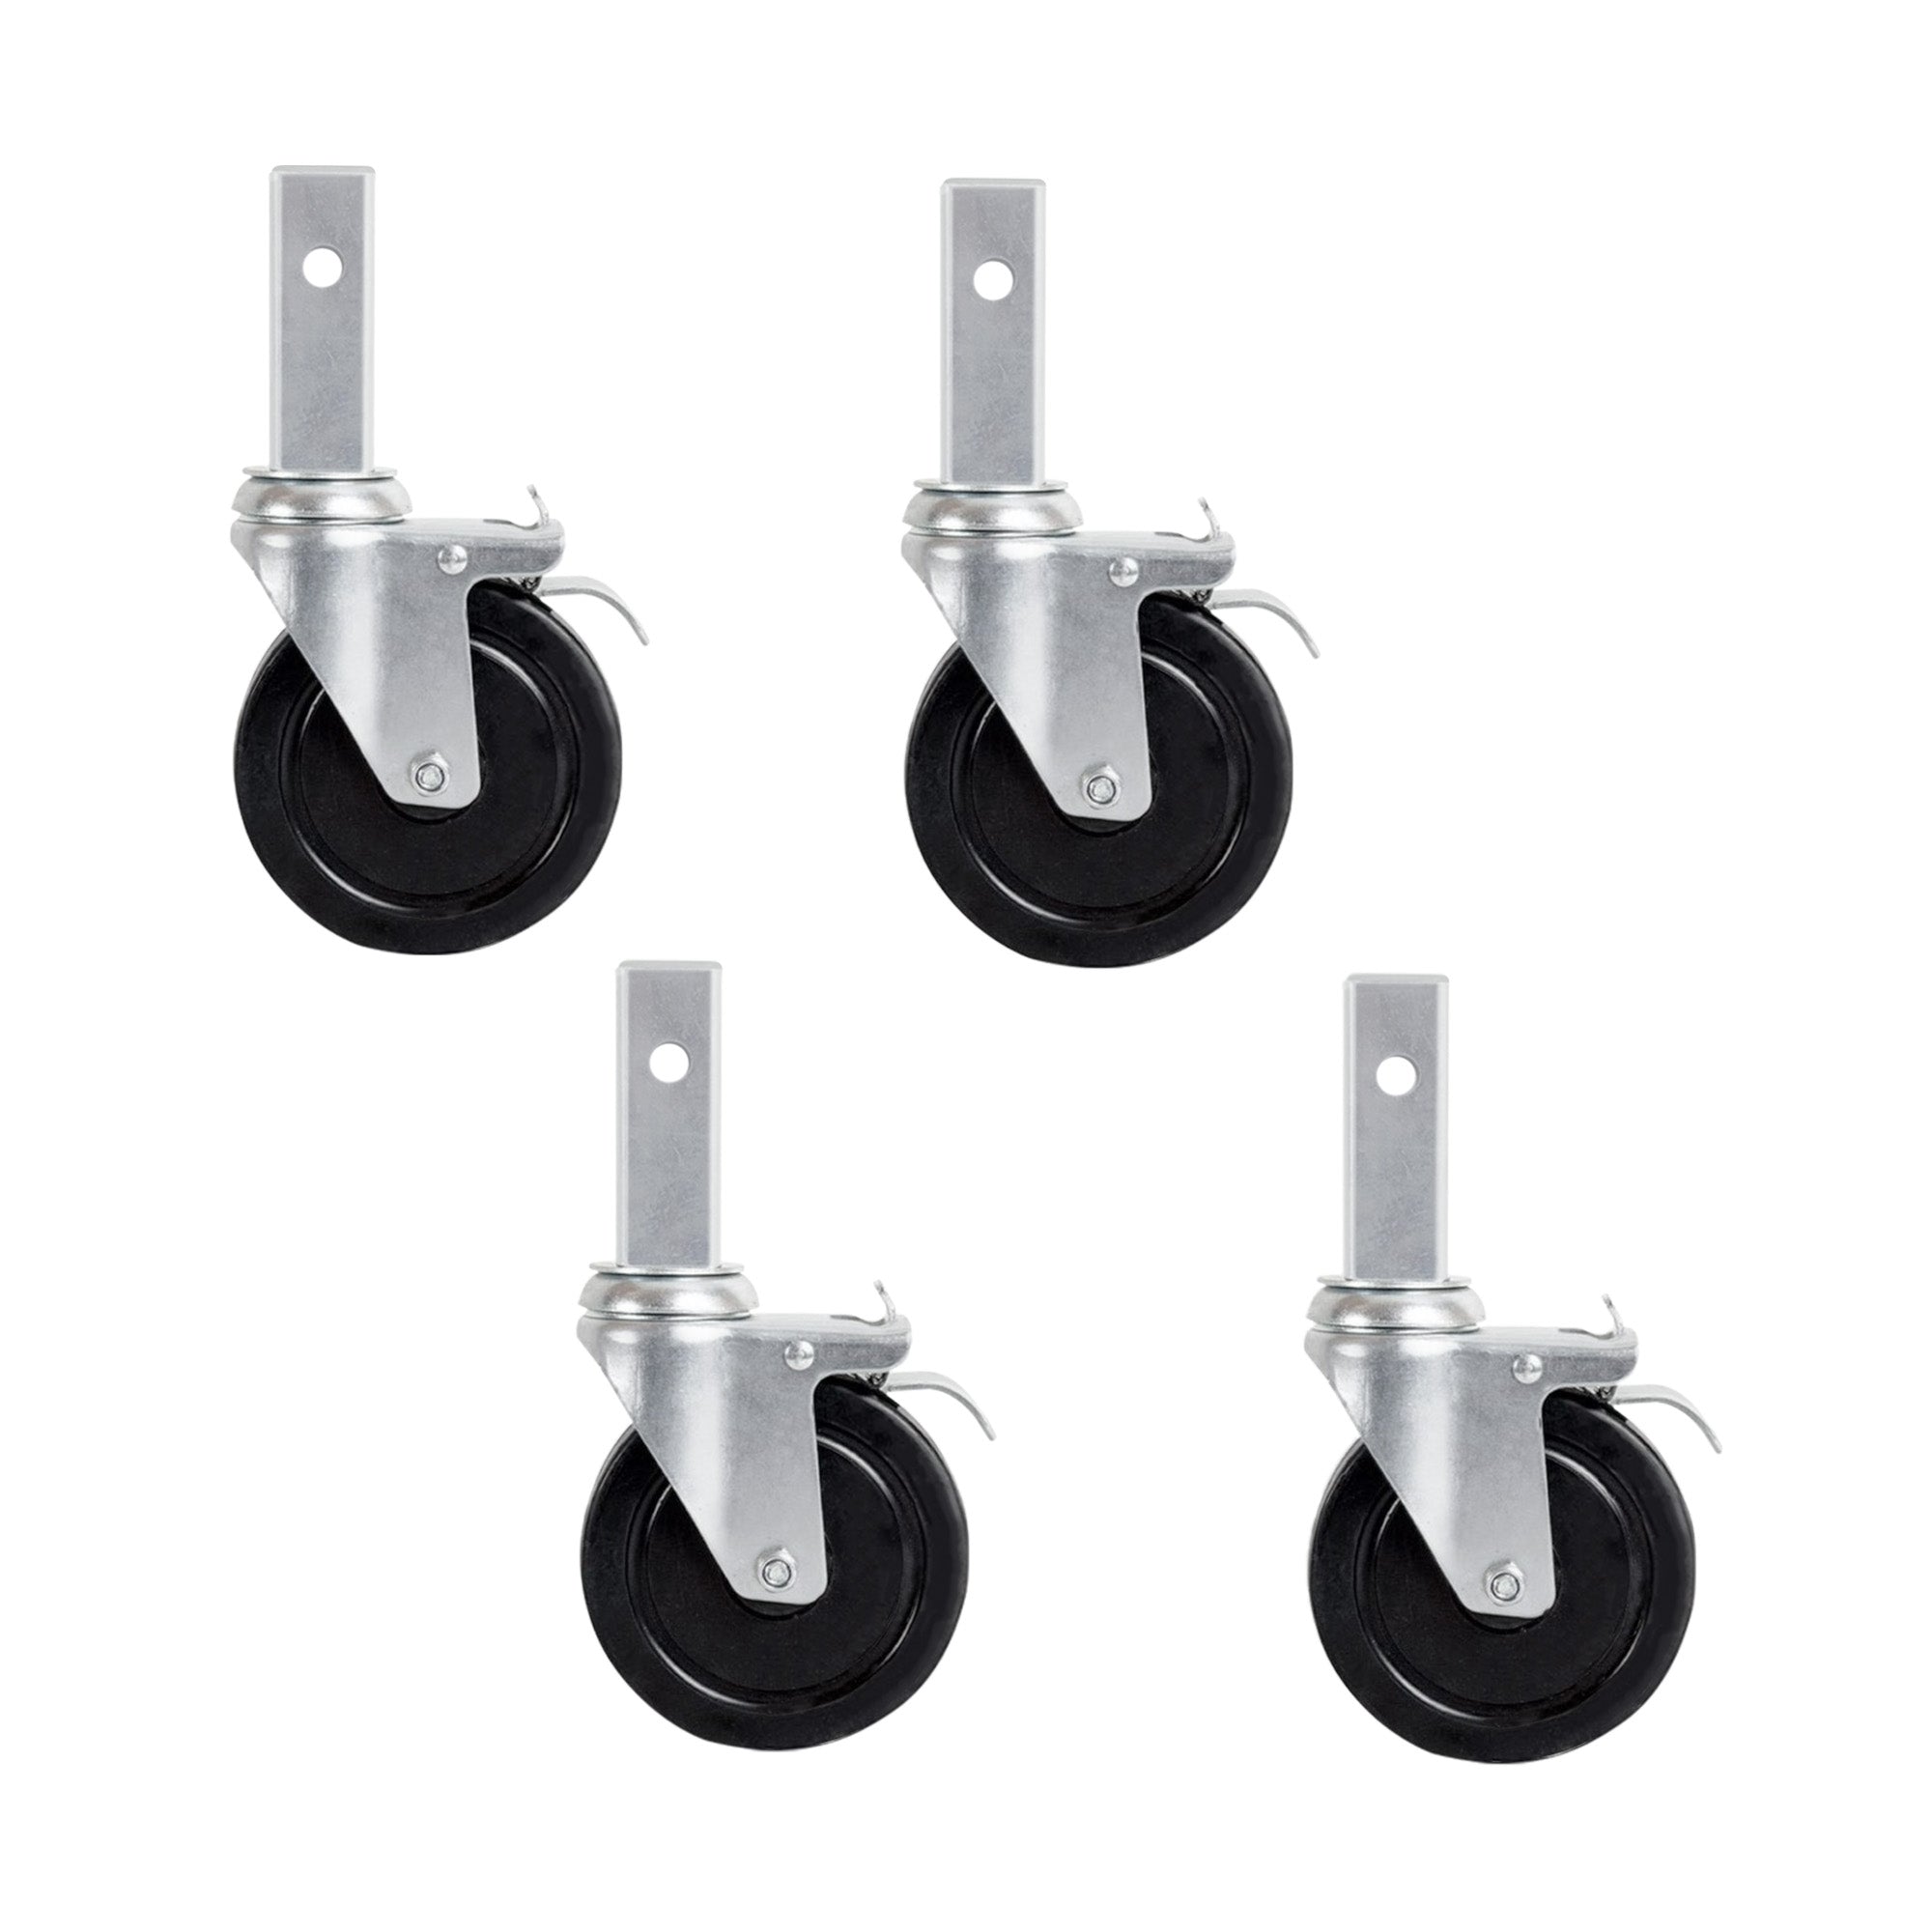 Metaltech 5" Casters with Locking Pin for Jobsite Series Baker Scaffold